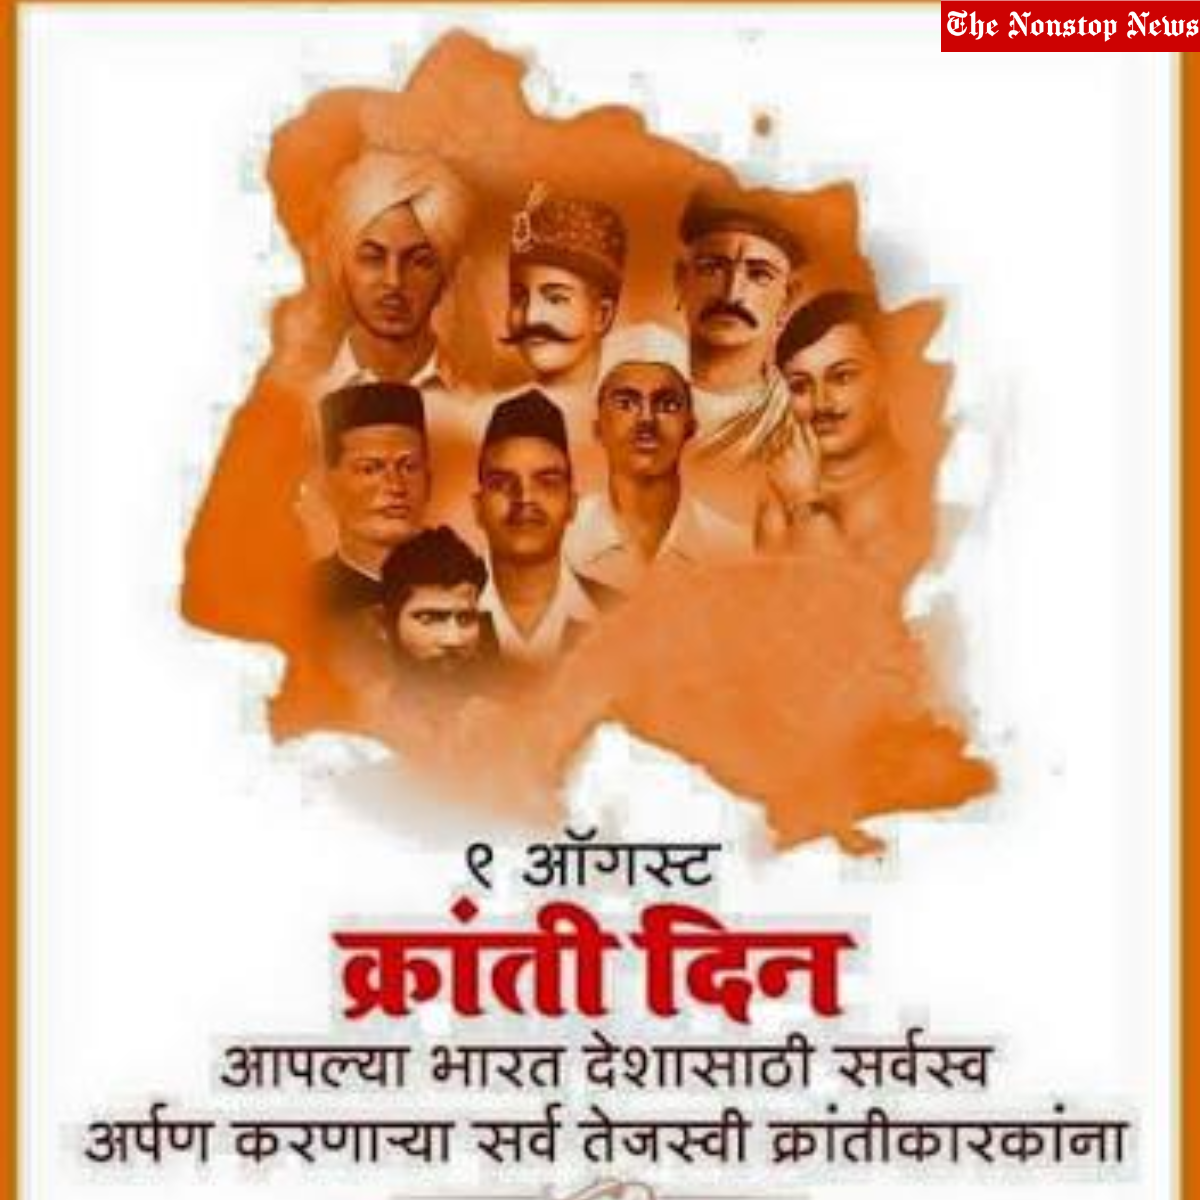 August Kranti Din 2022: Wishes, Quotes, Drawings, Images, Messages, Posters, Slogans, to Share on 'Quit Indian Movement Day'